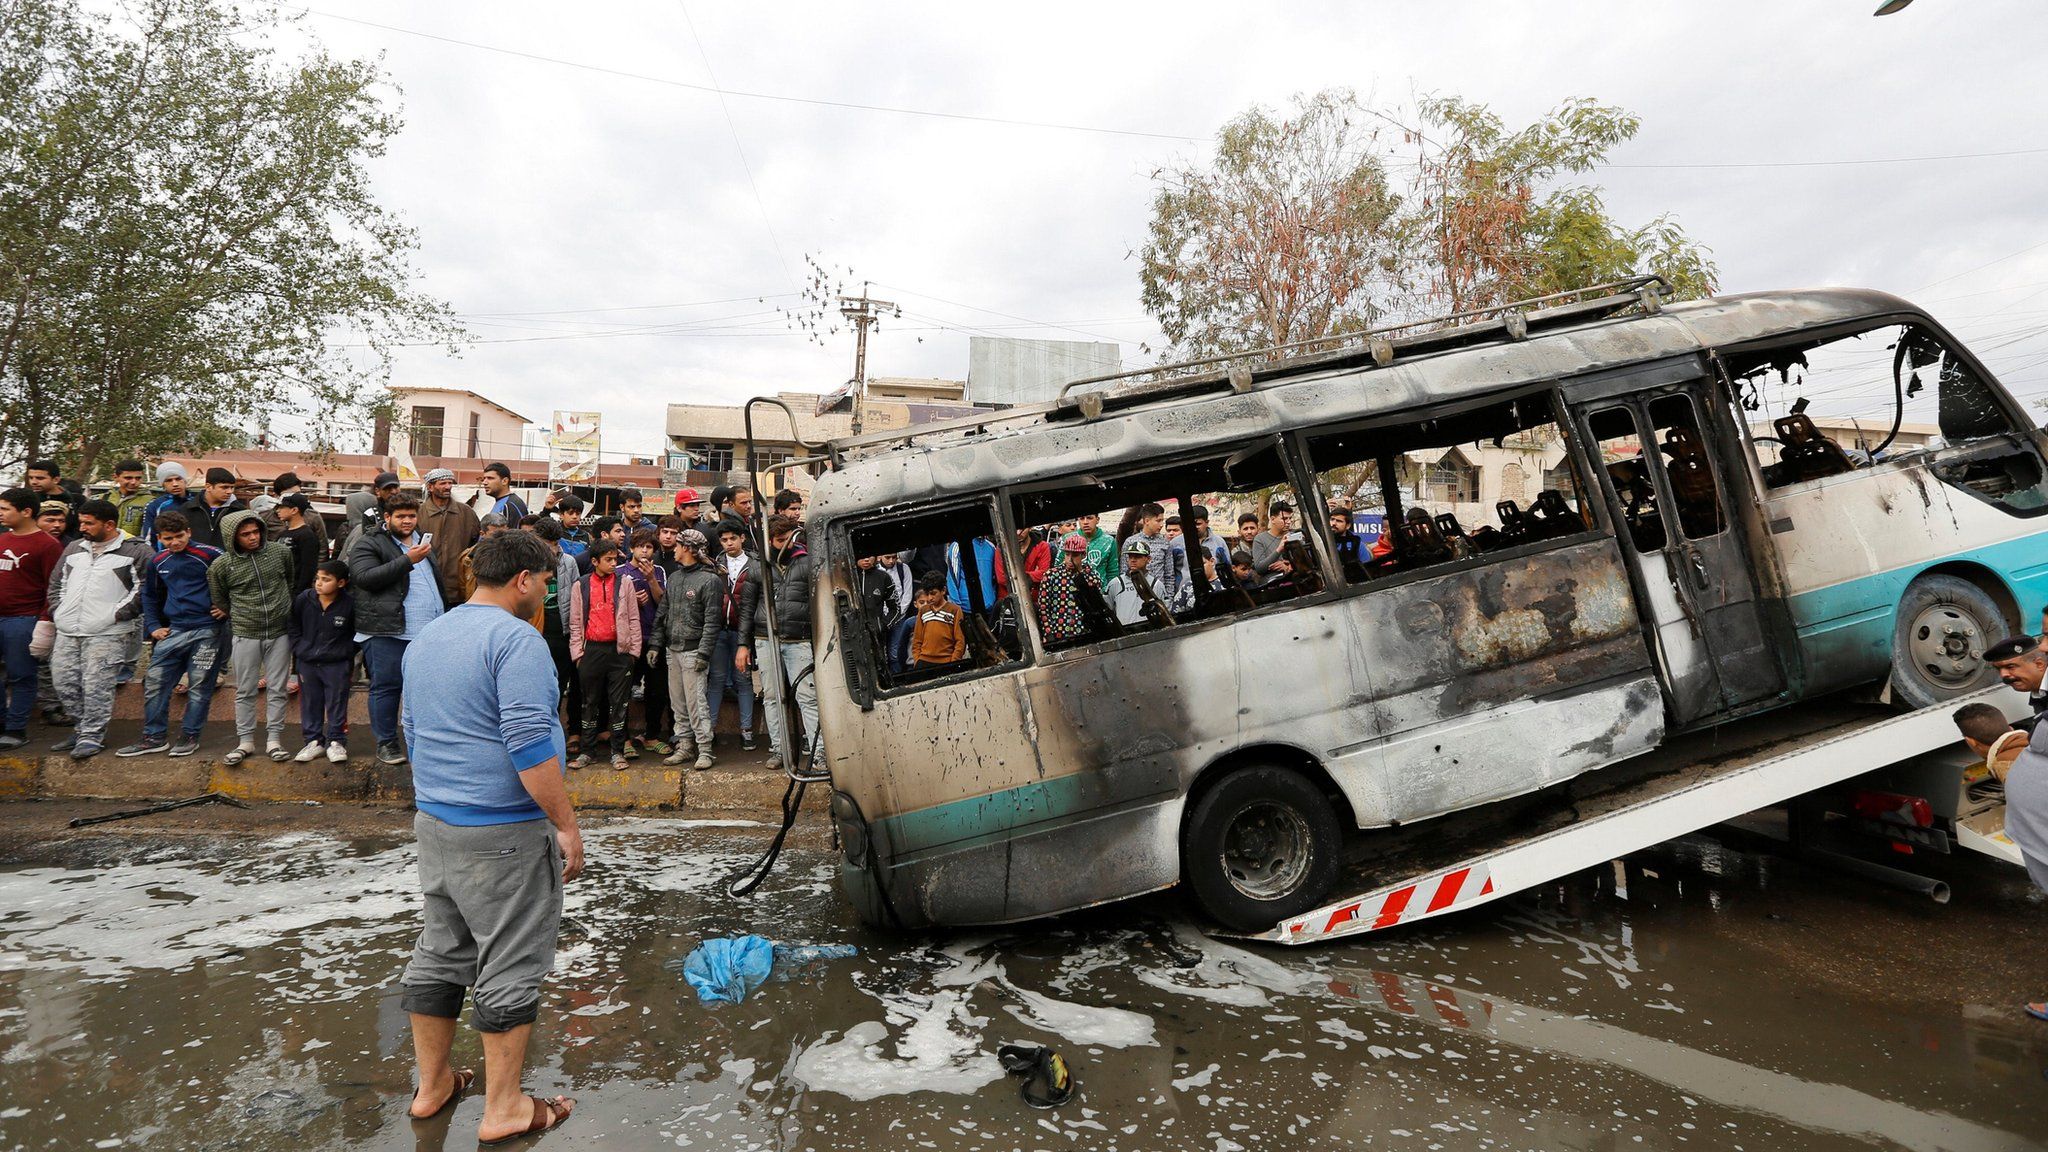 A burned bus is removed from the the scene of a suicide car bomb attack in Sadr City, Baghdad (2 January 2017)